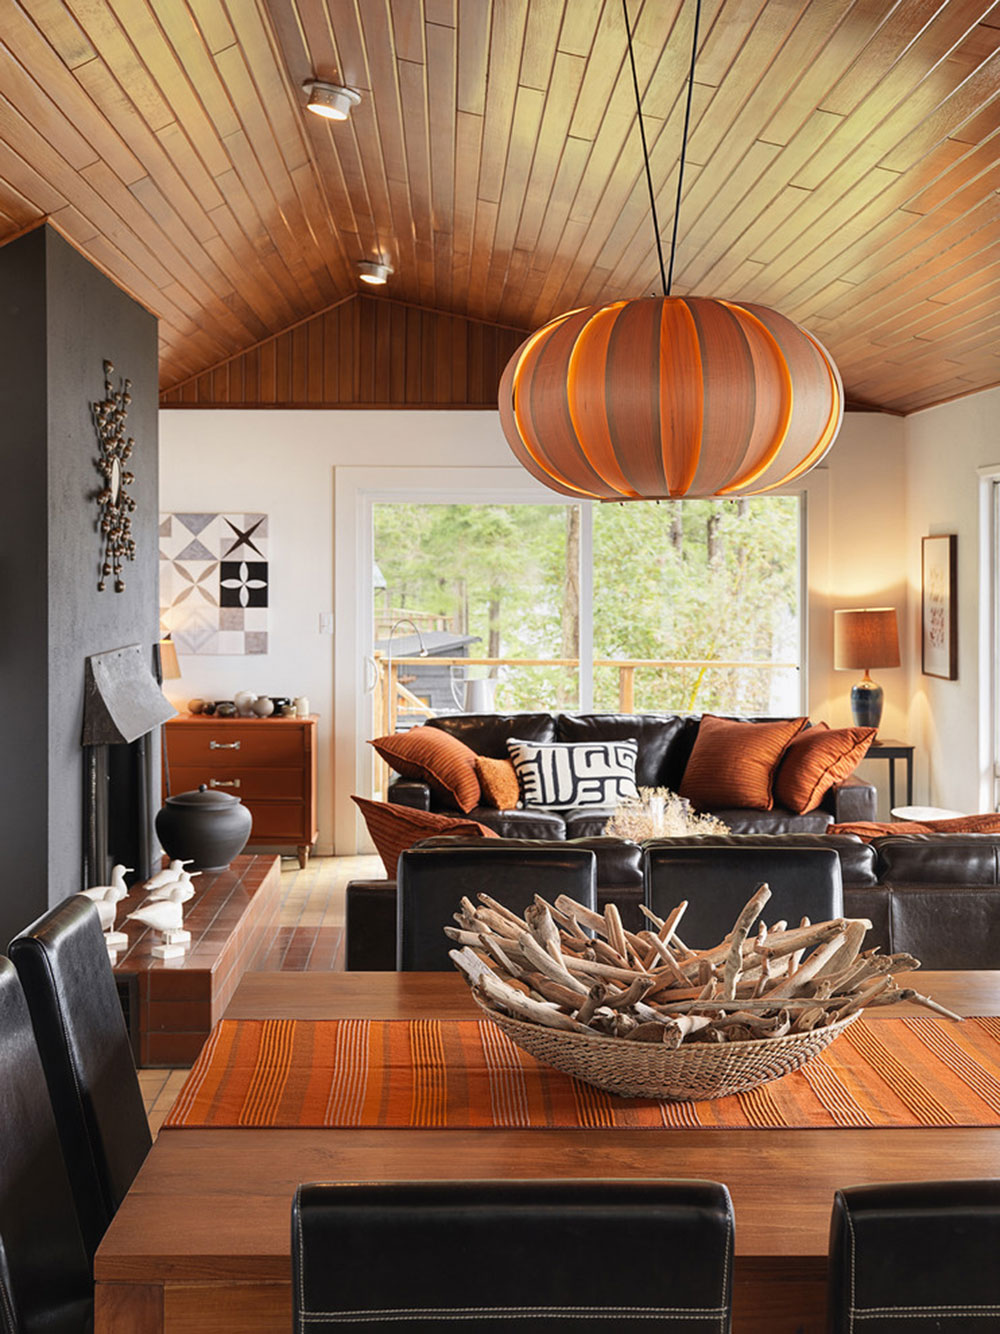 Examples-Of-What-Color-Goes-With-Orange17 Examples Of What Color Goes With Orange (22 House Interiors)